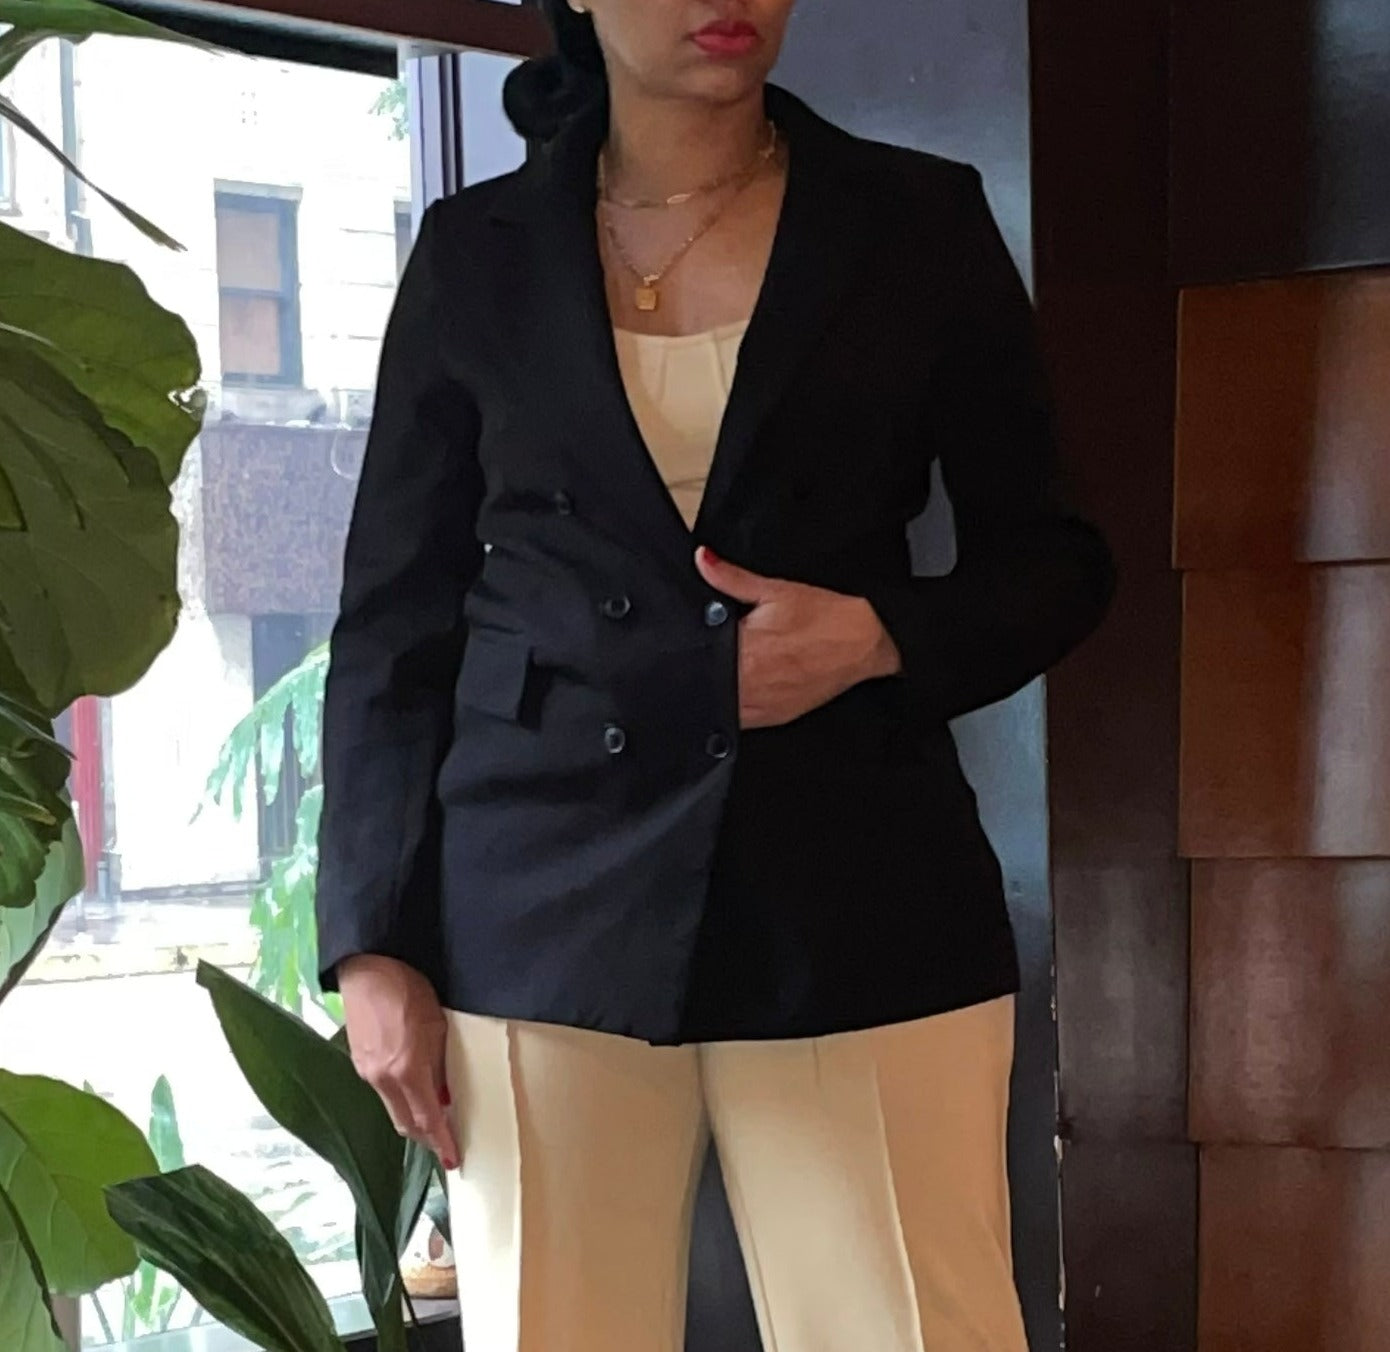 Double Breasted Blazer, Collared, Long Body Length